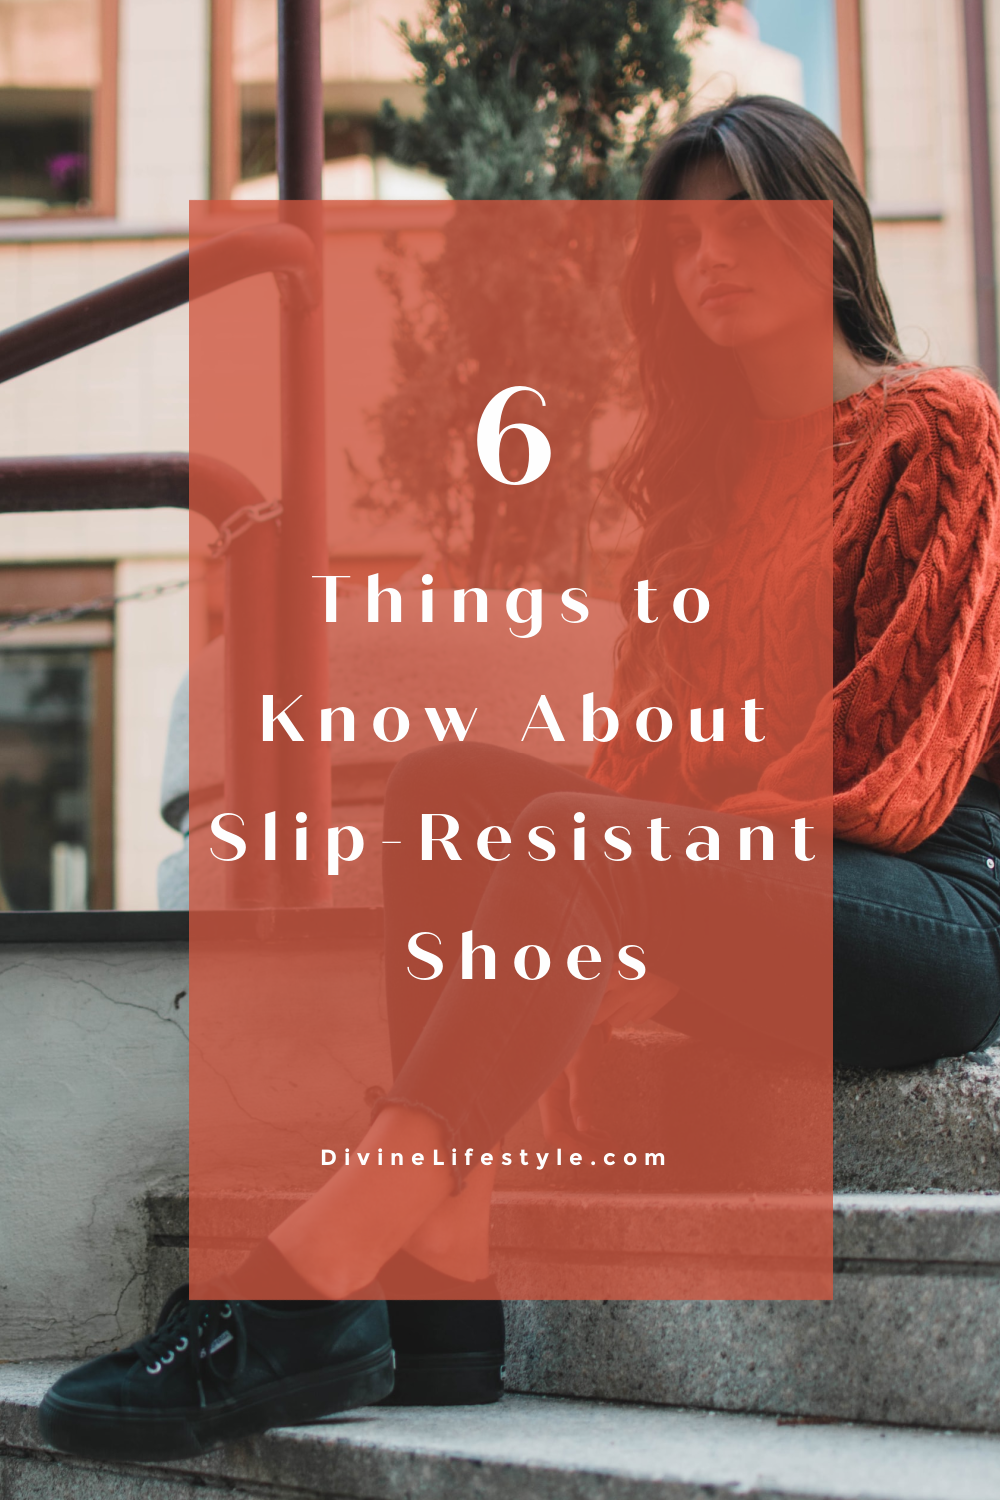 Good to Know About Slip-Resistant Shoes